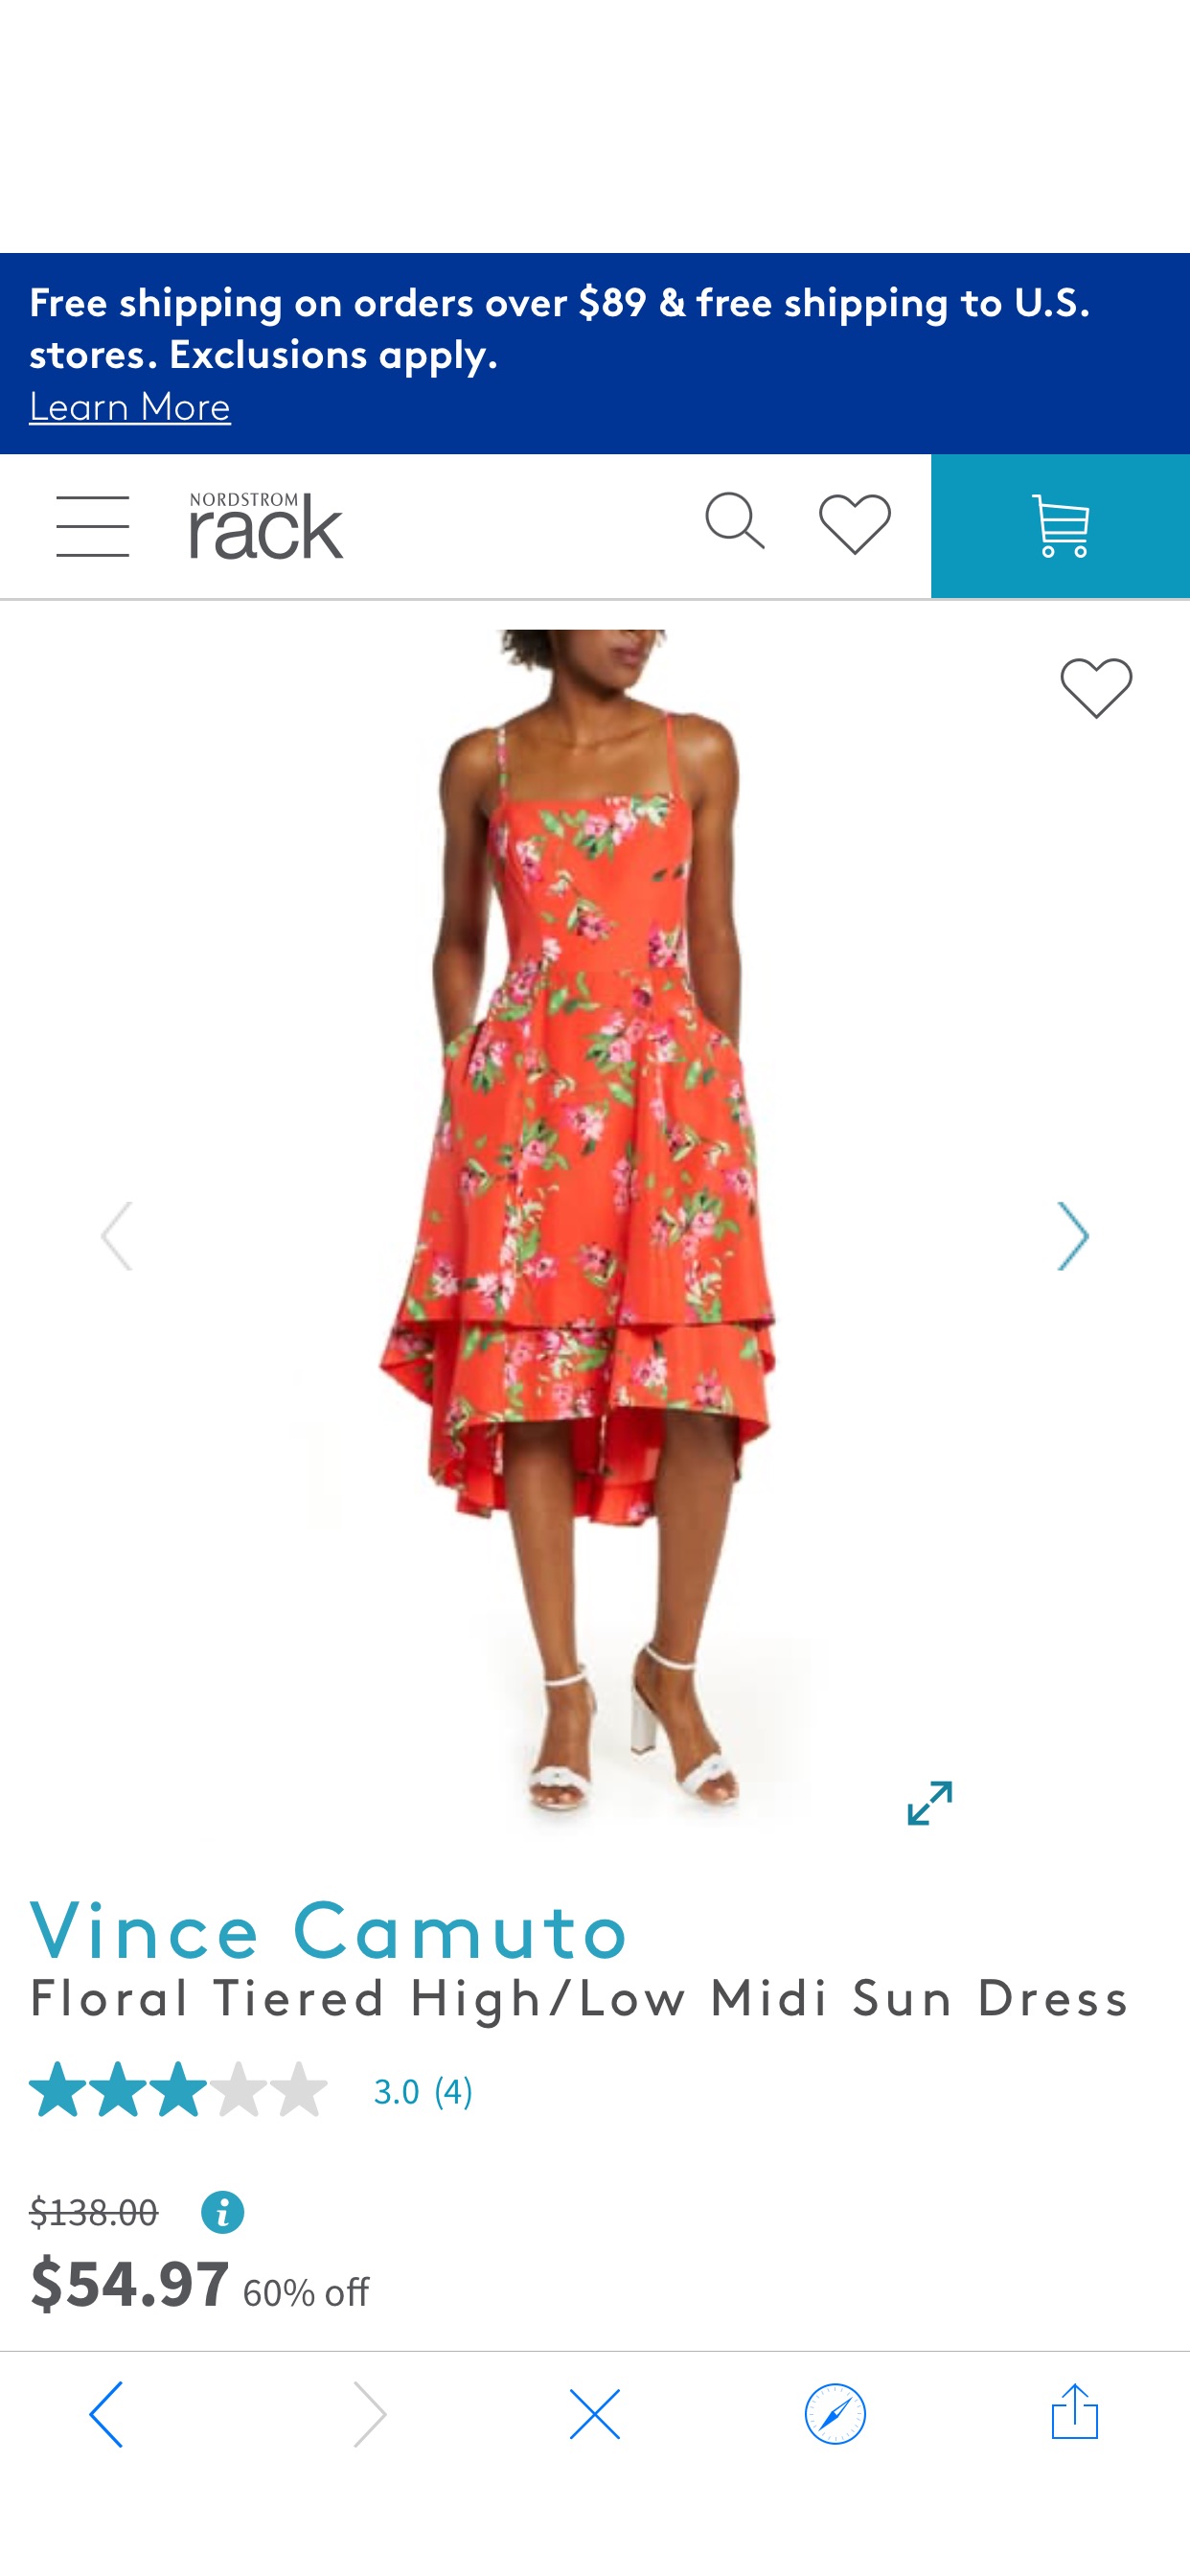 Vince Camuto | Floral Tiered High/Low Midi Sun Dress | Nordstrom Rack
连衣裙